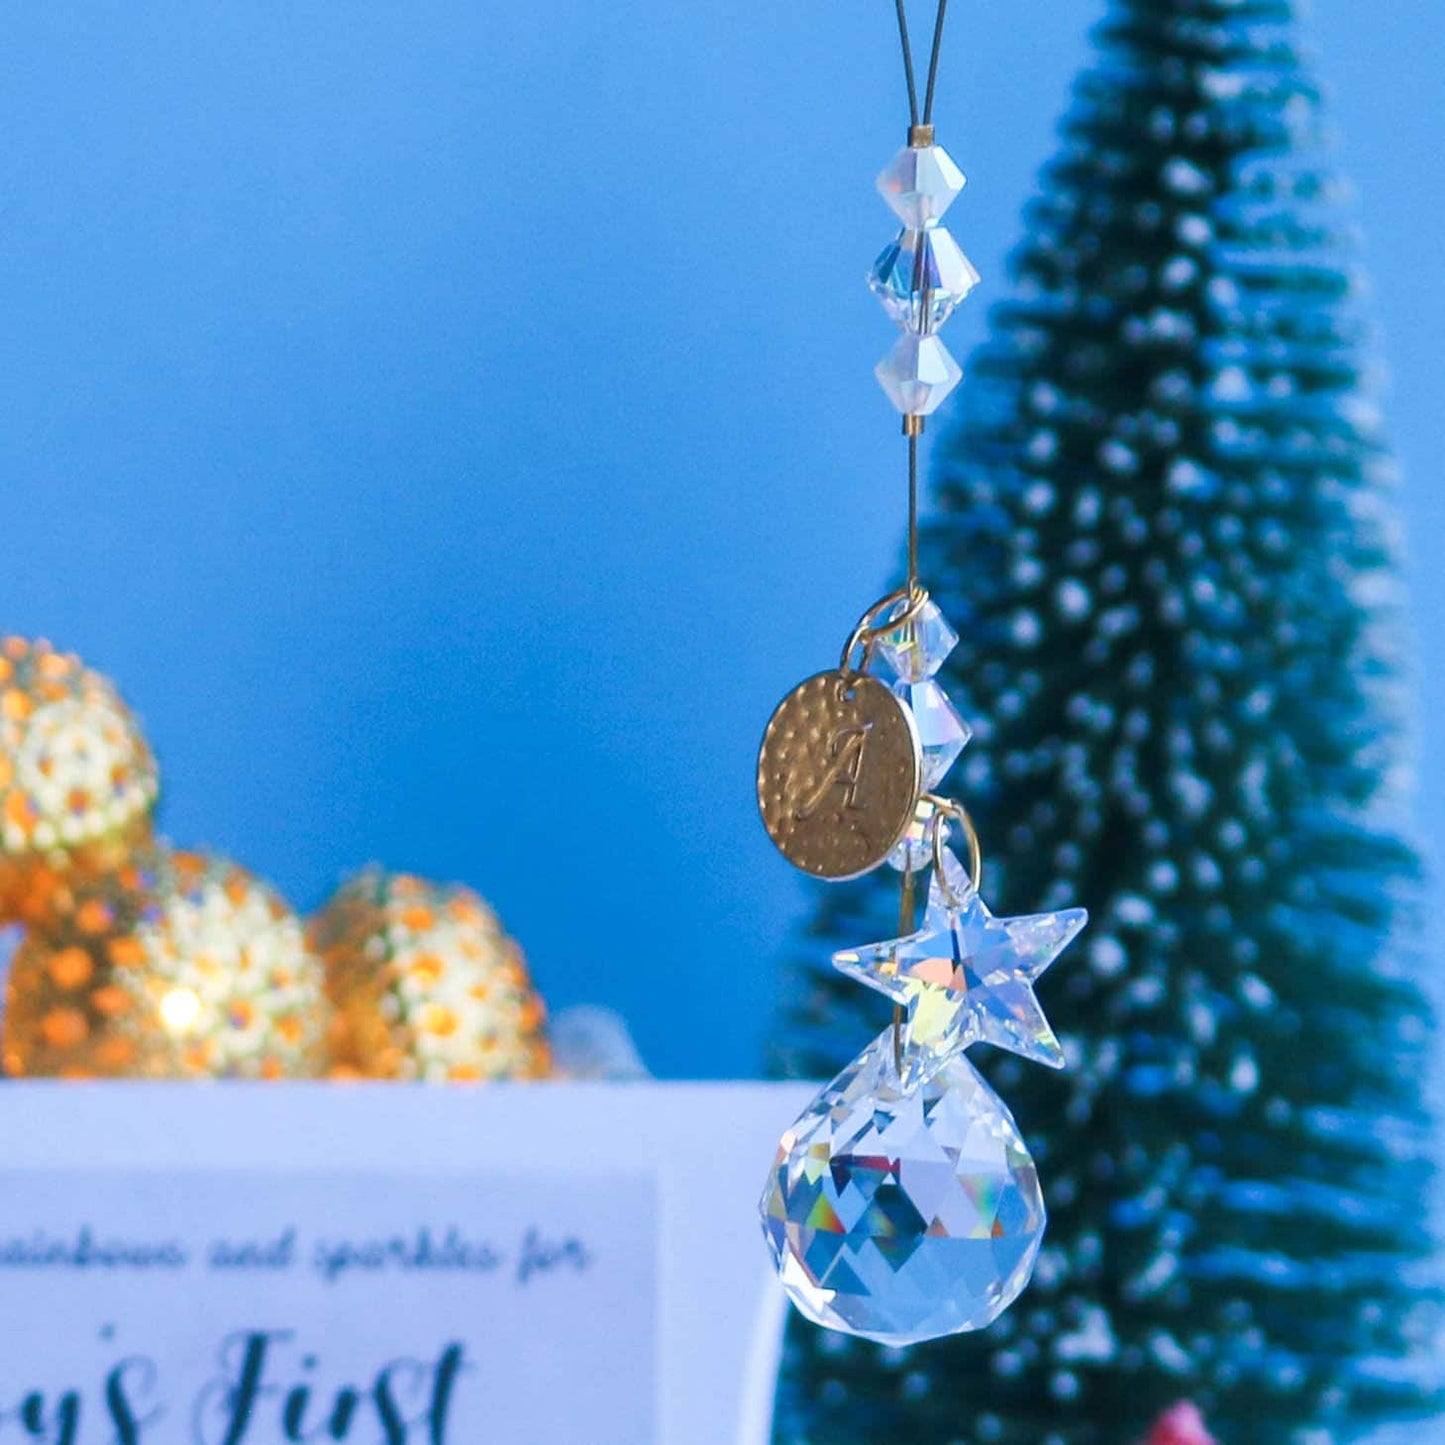 Baby's first Christmas, Crystal Tree Decoration suncatcher